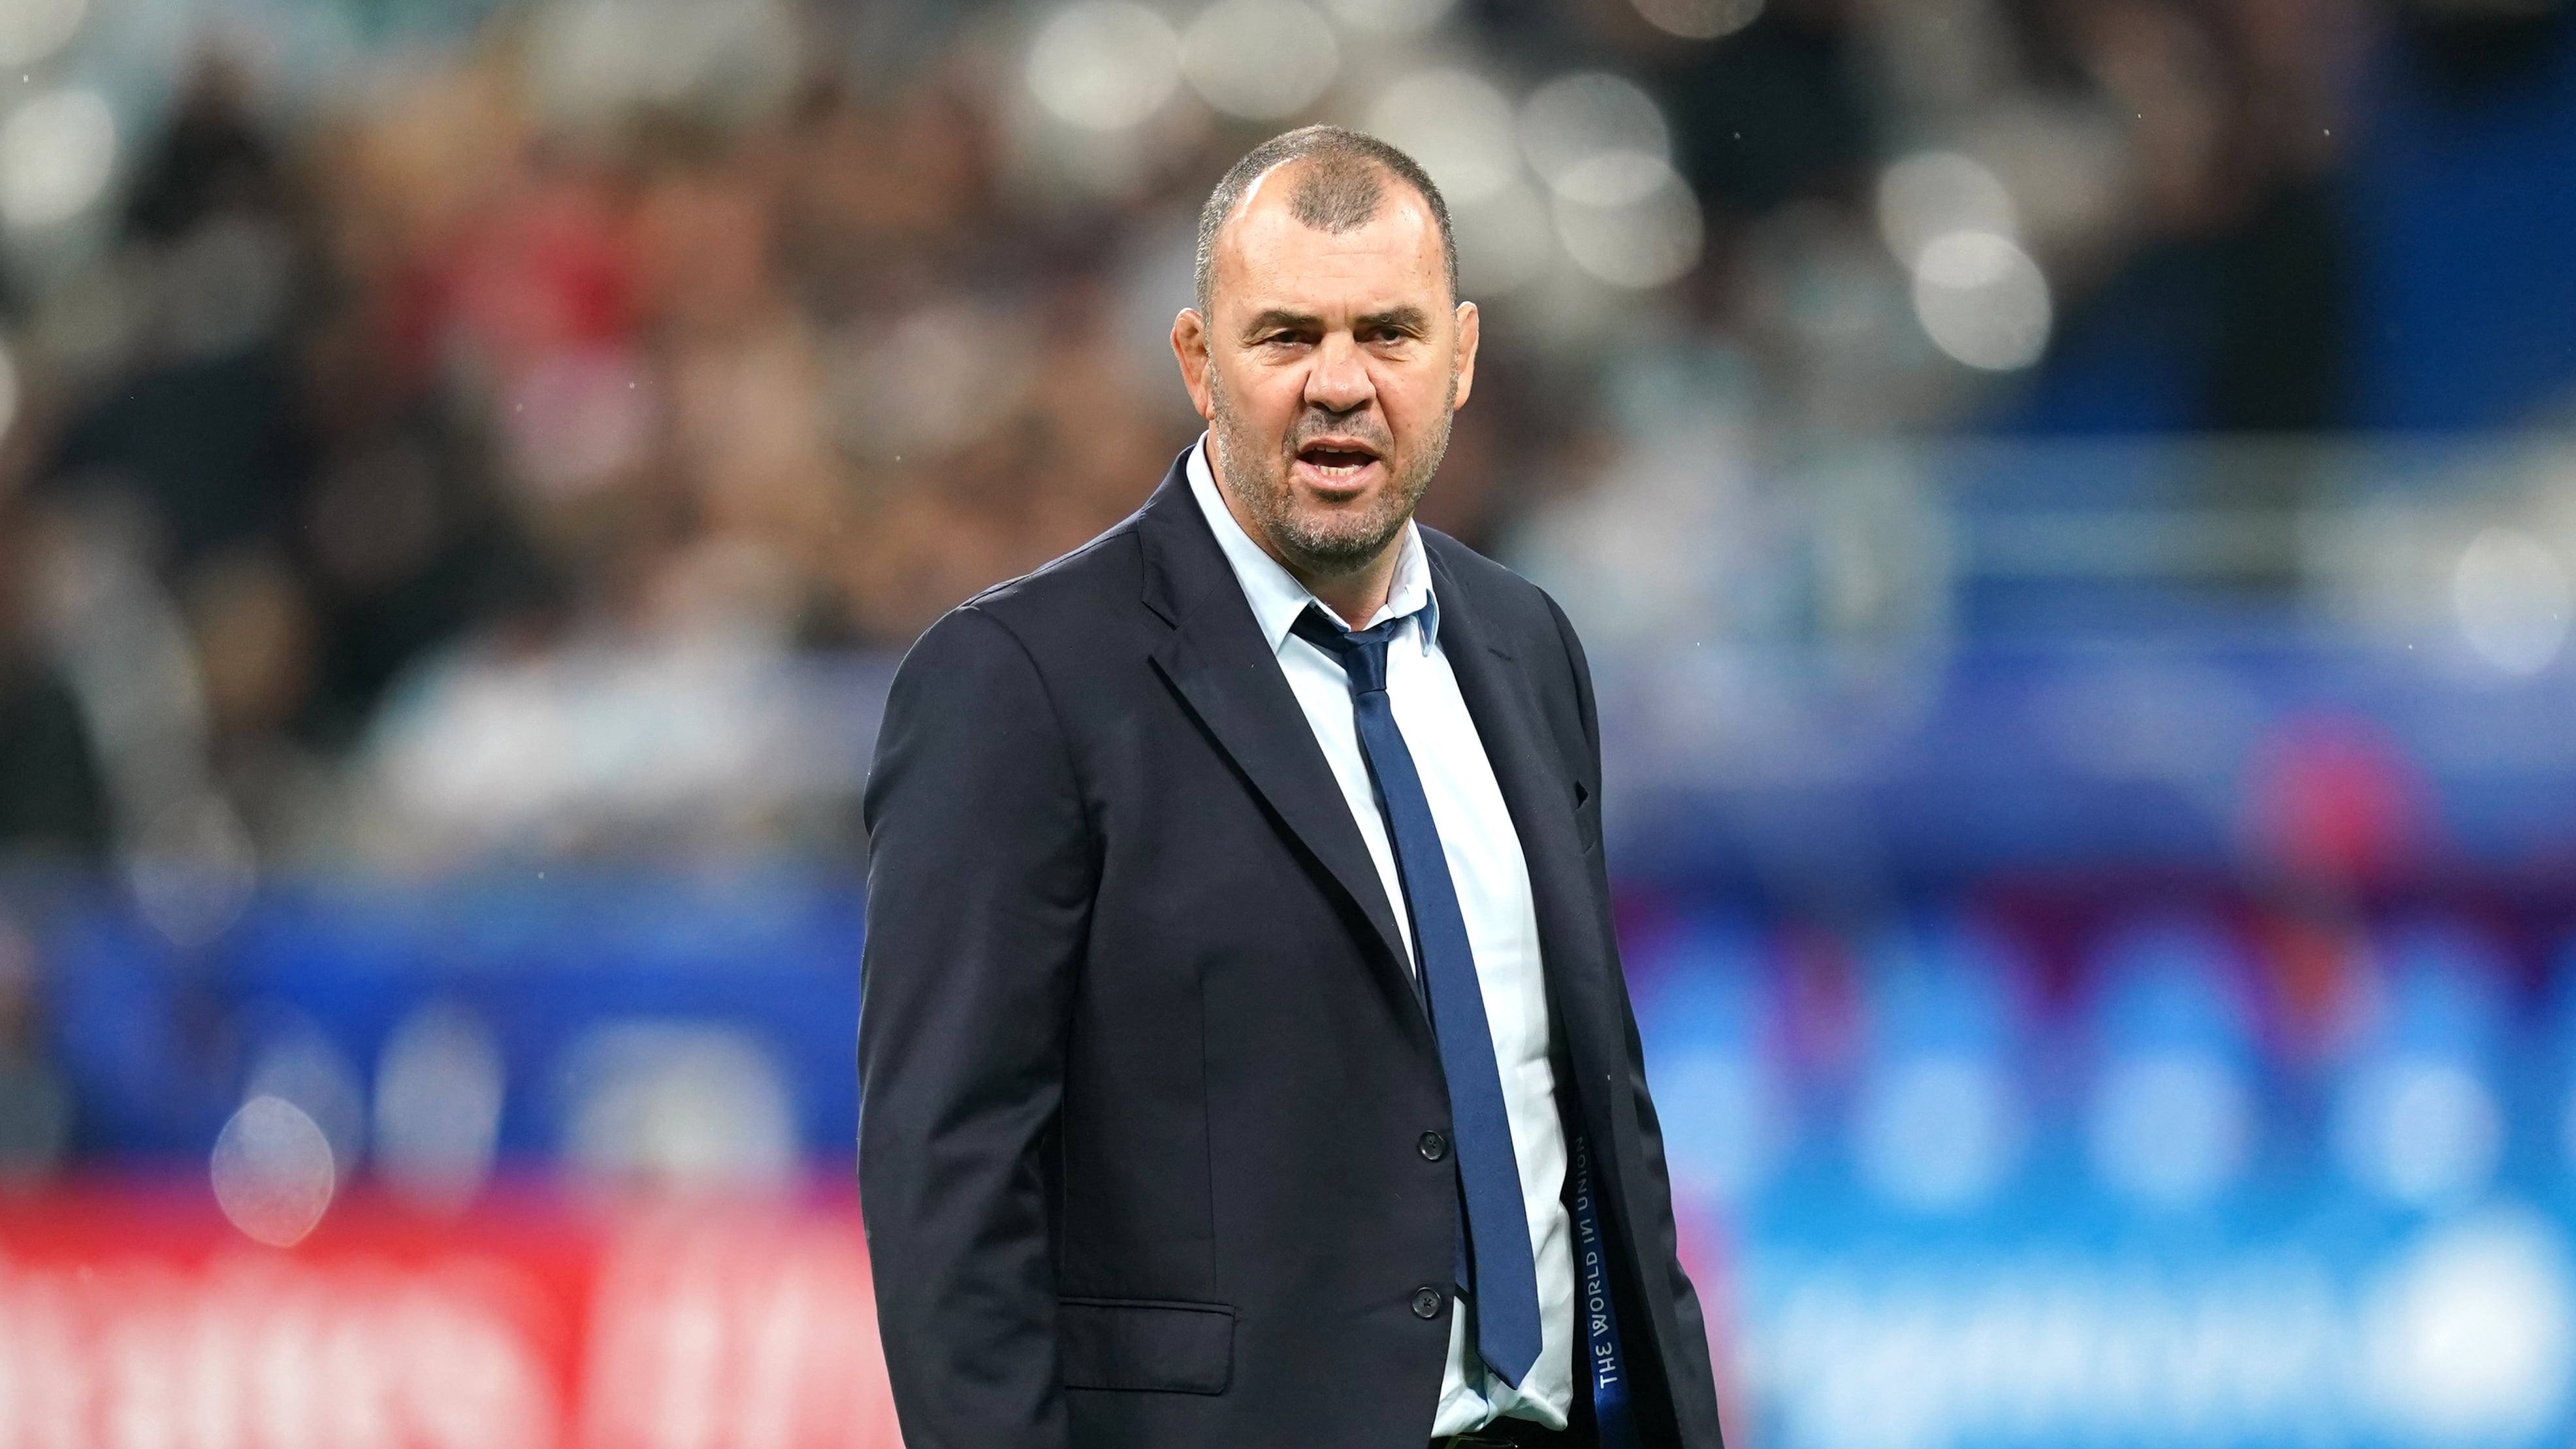 Michael Cheika is the new head coach of Leicester